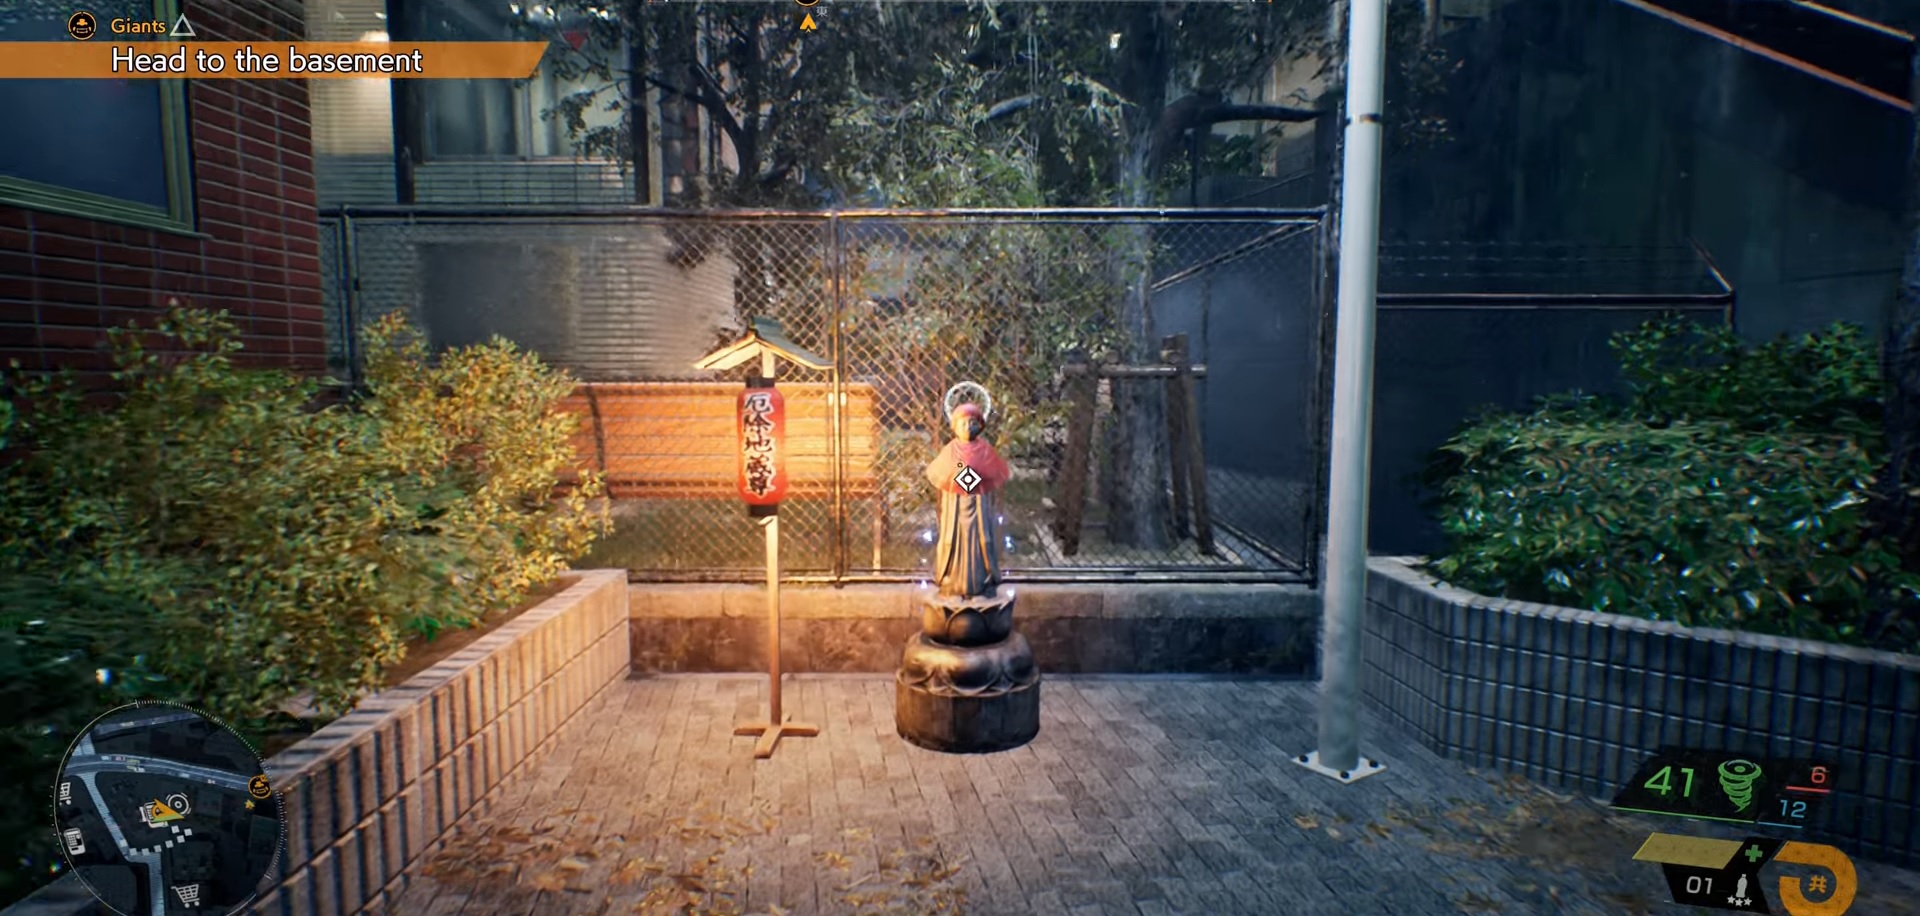 location in the game of Ghostwire Tokyo Jizo Statues Locations